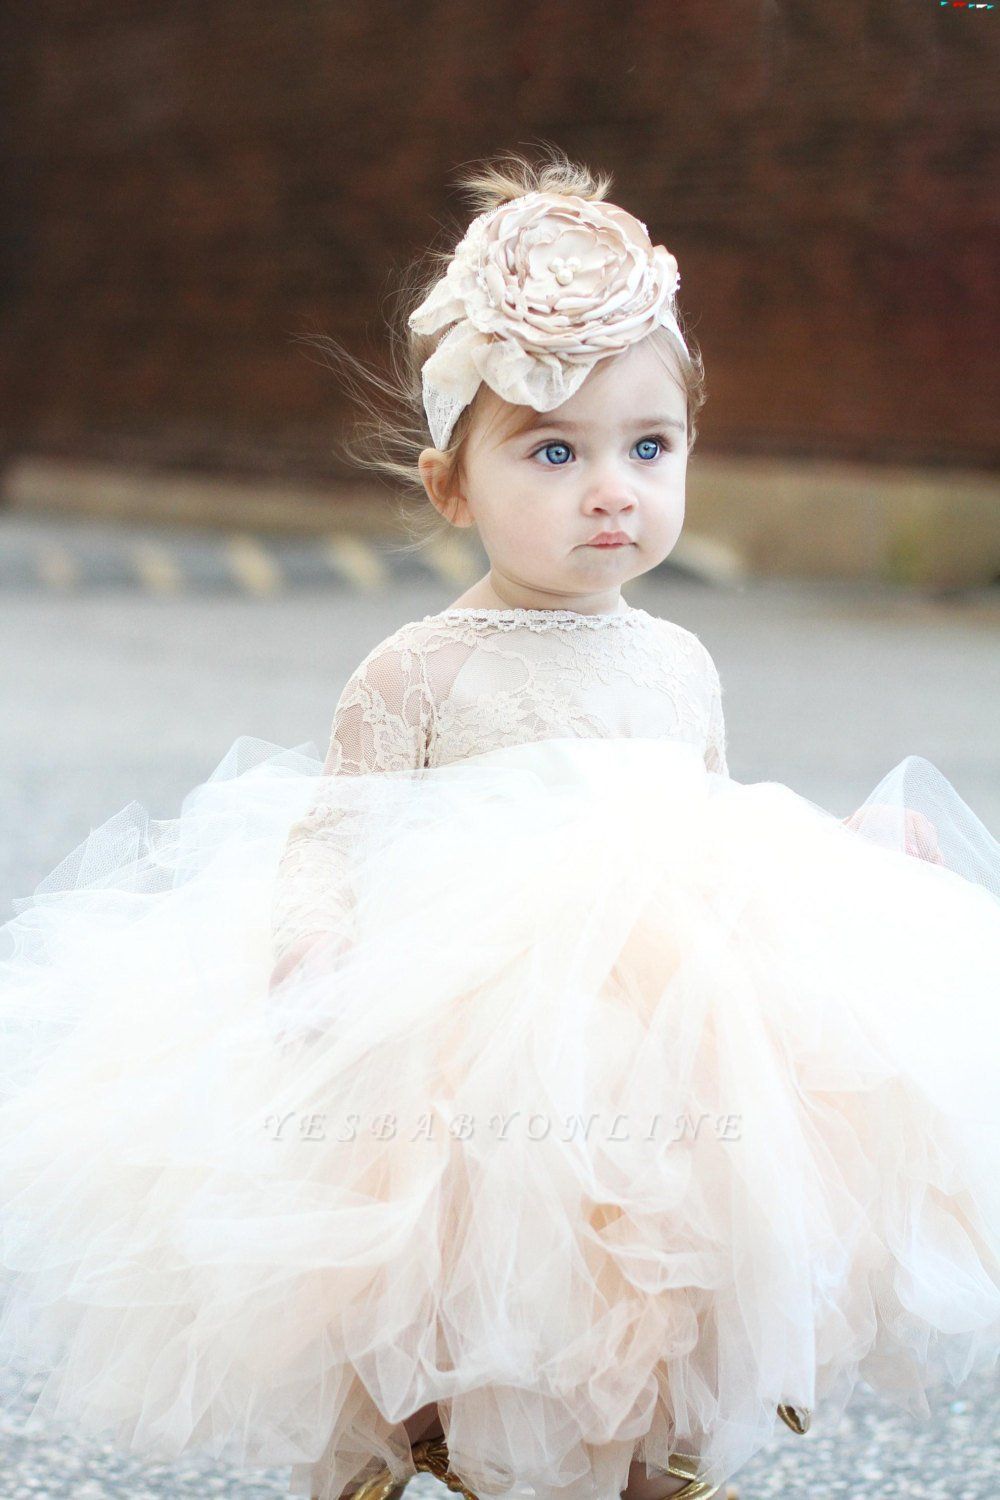 Flower Girl Dresses - Every Color & Adorable Style